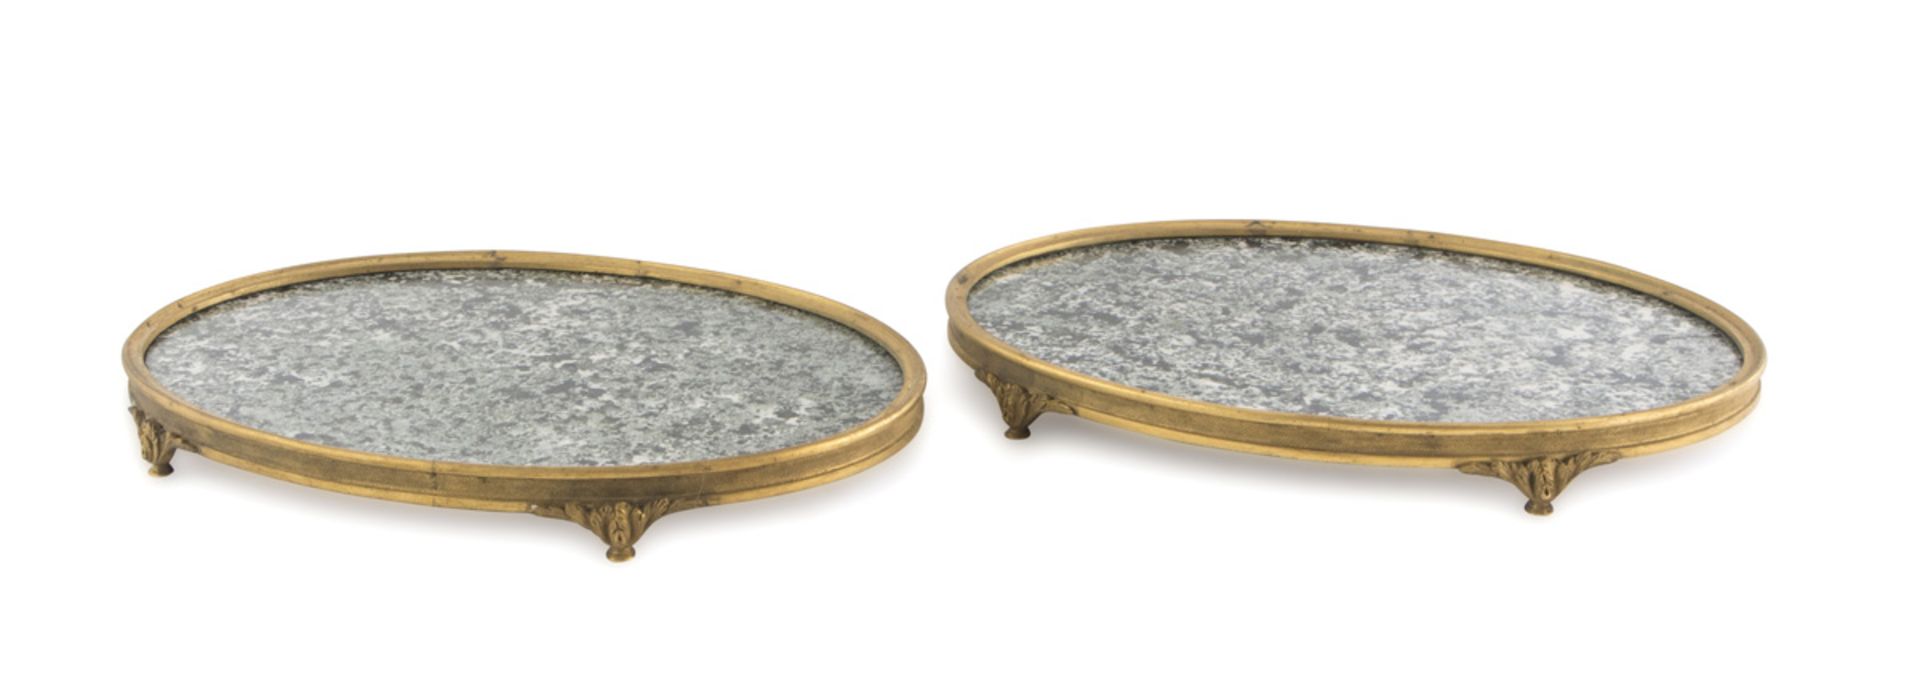 A PAIR OF BASES IN GRANITE EARLY 19TH CENTURY